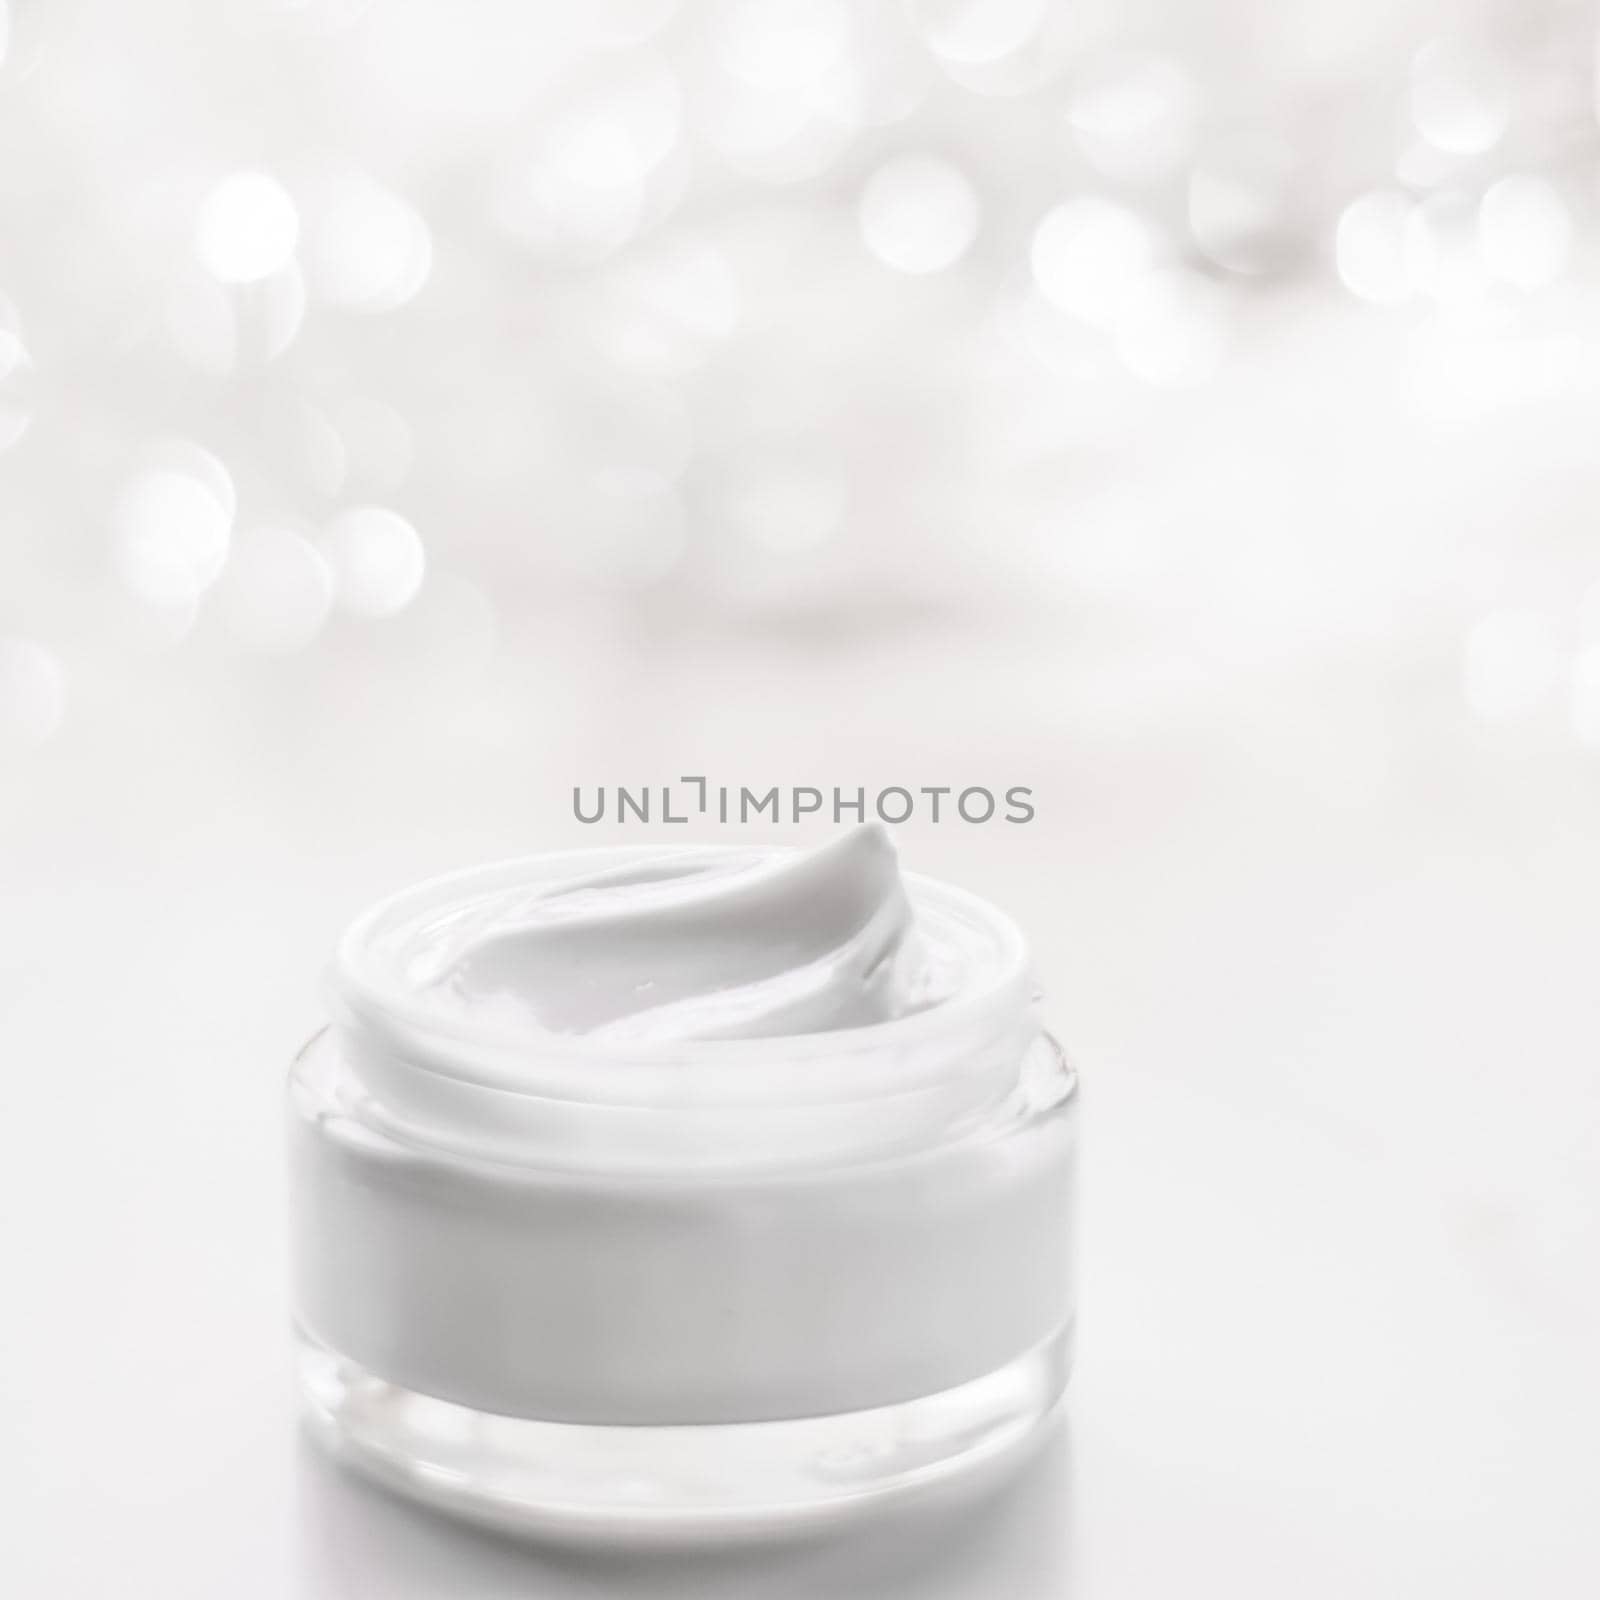 Cosmetic branding, gift and spa concept - Facial cream moisturizer jar on holiday glitter background, moisturizing skin care as lifting emulsion, anti-age cosmetics for luxury beauty skincare brand